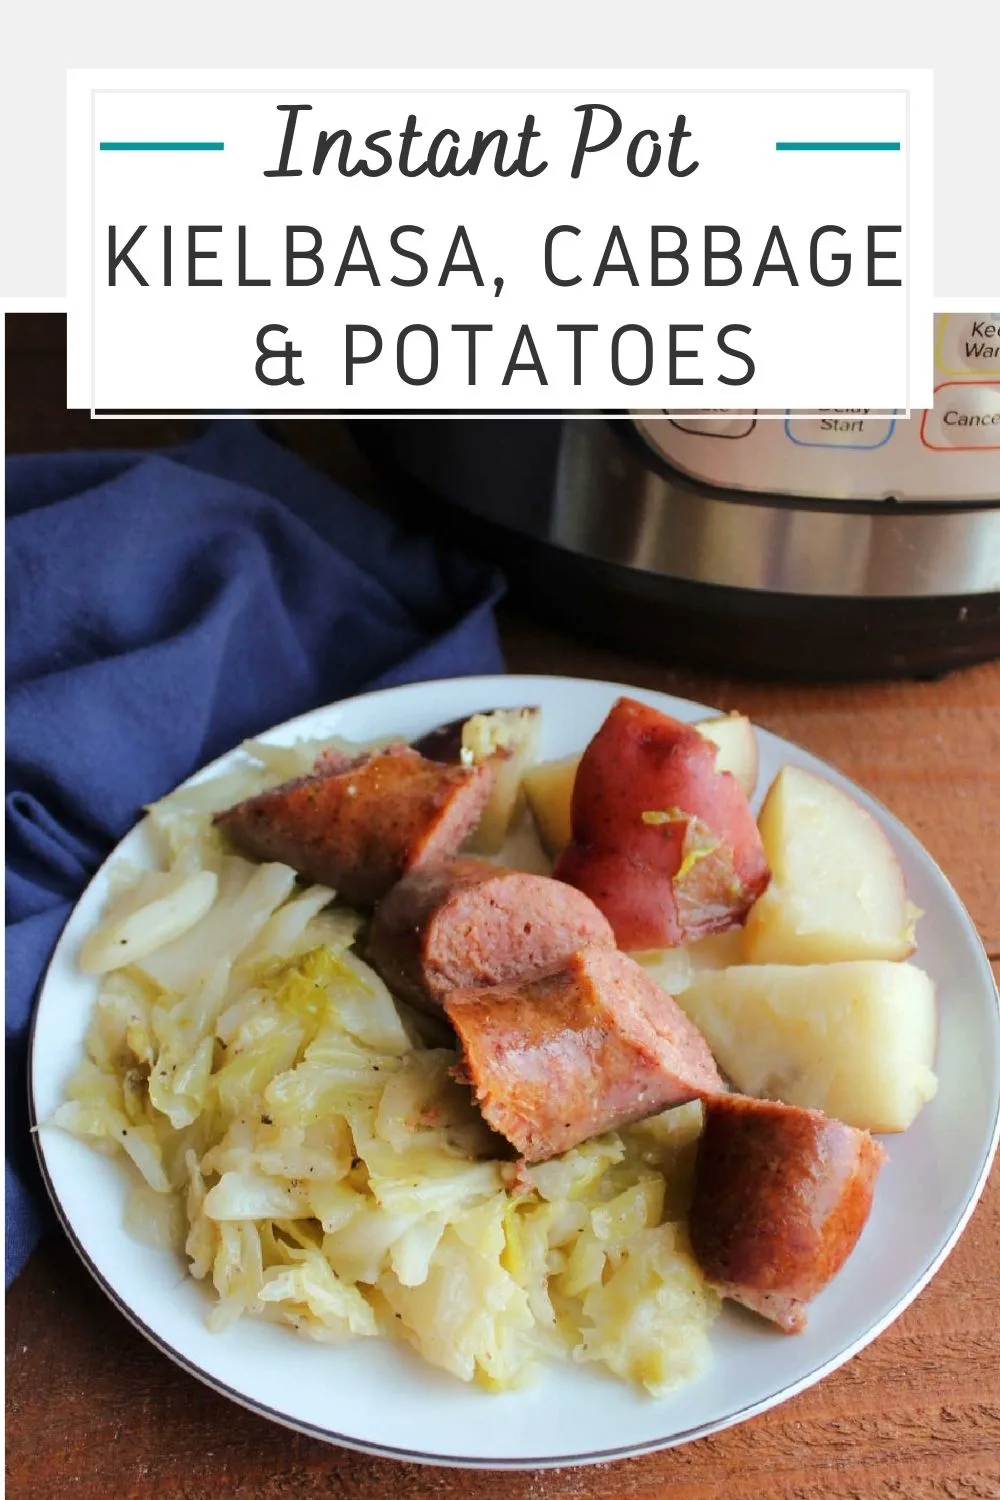 Make a whole well balanced meal in almost no time with the help of a pressure cooker. Kielbasa, cabbage and potatoes in the instant pot is a delicious all in one dinner.